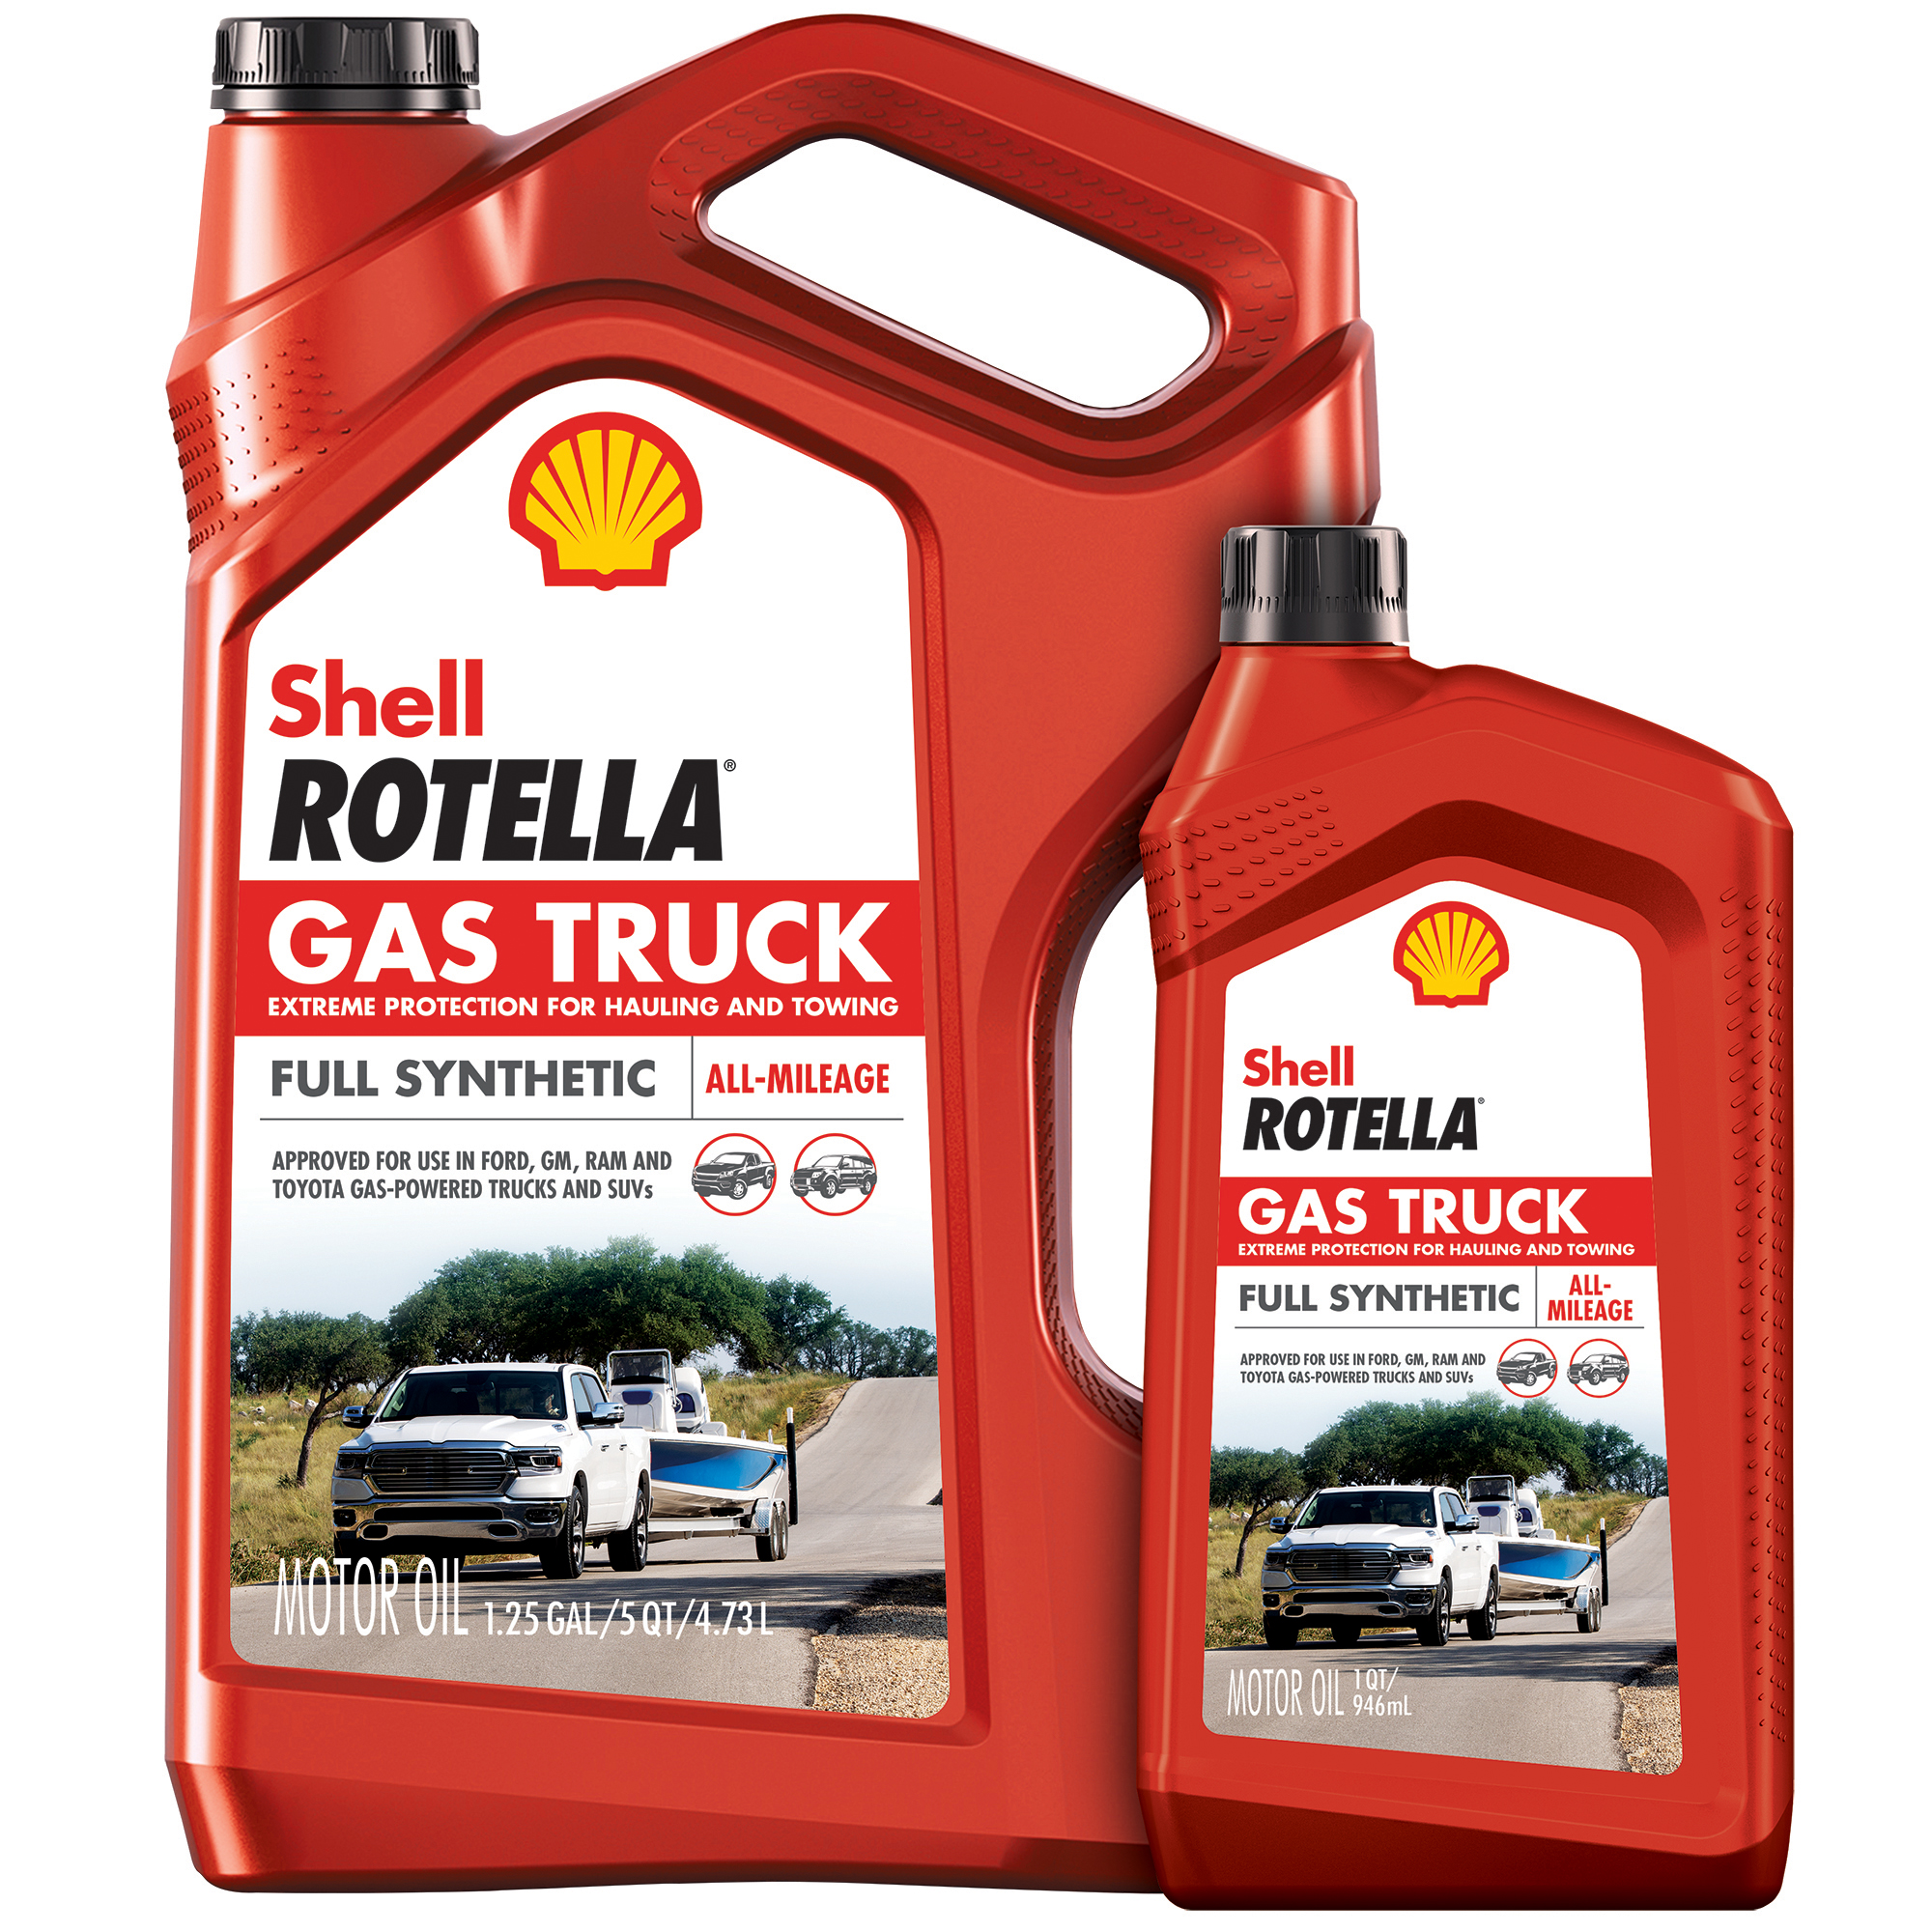 Shell Rotella Gas Truck Full Synthetic Rebate